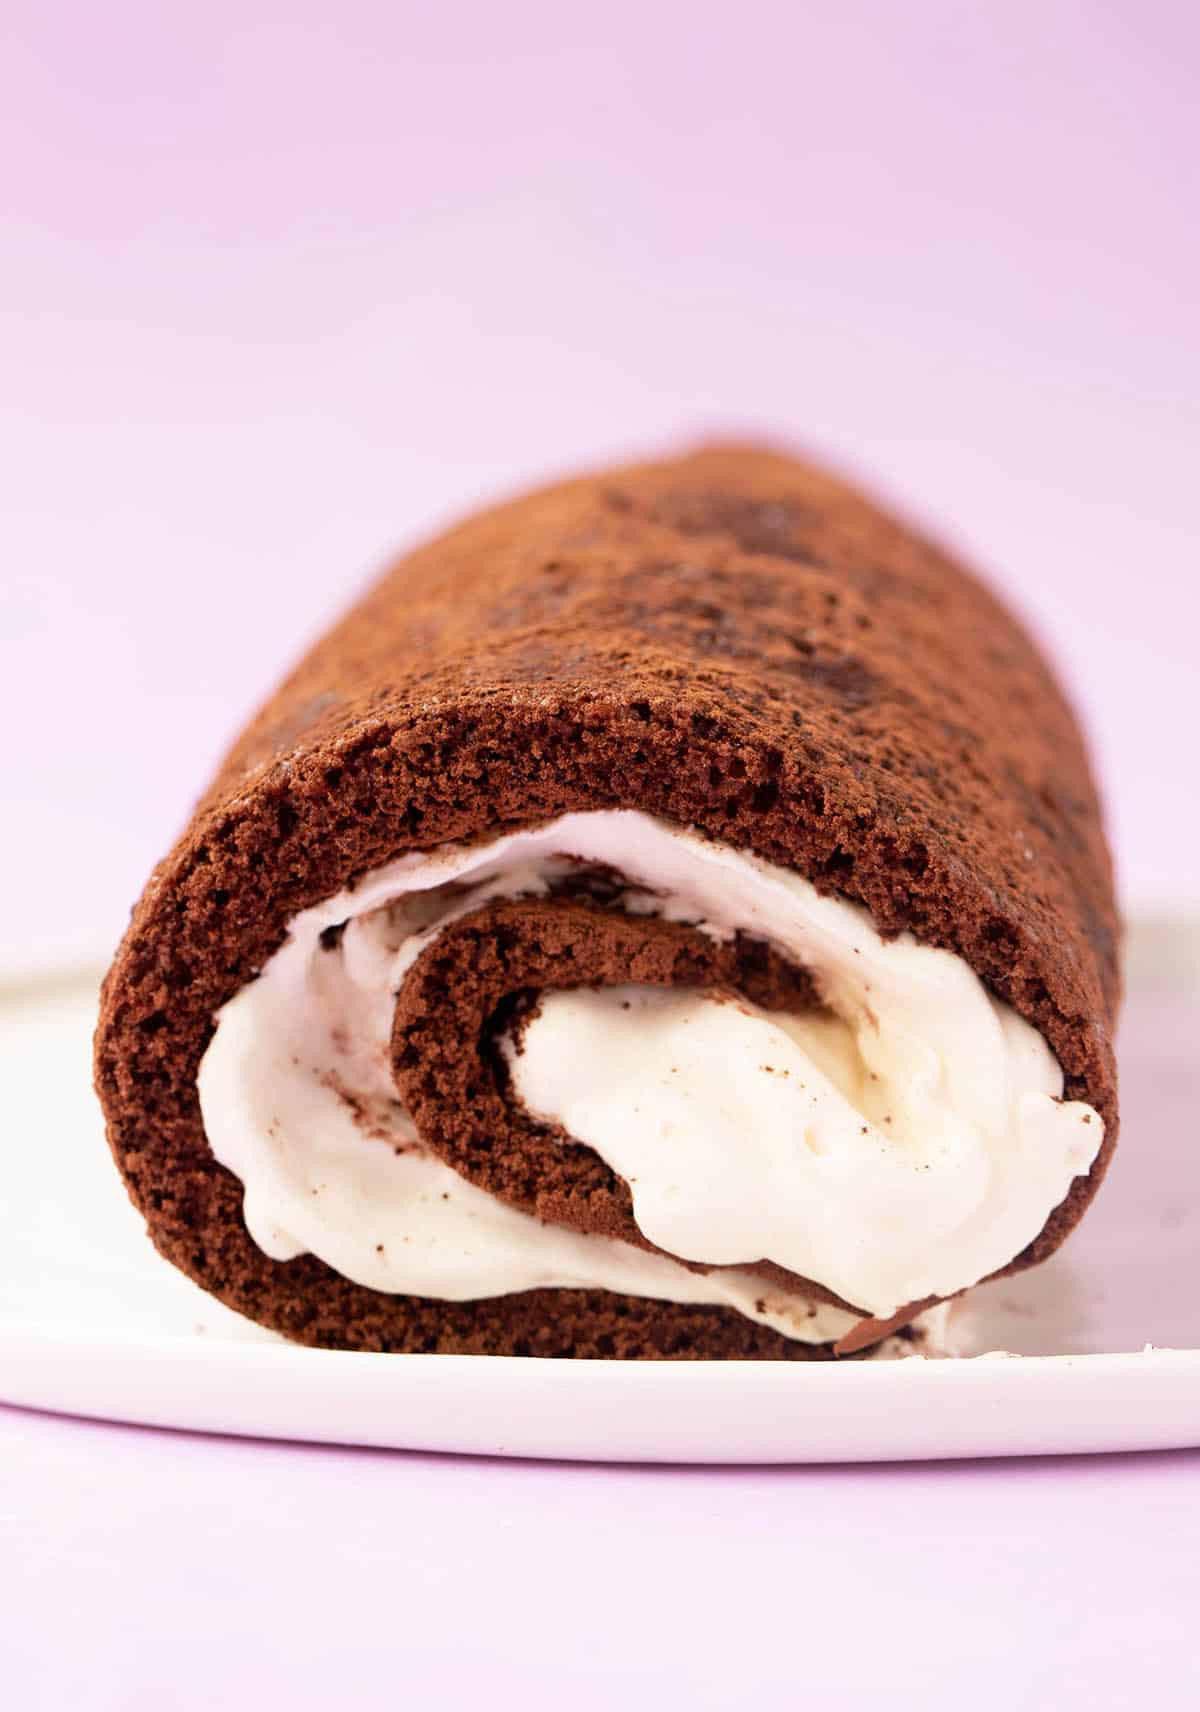 A beautiful Chocolate Cake roll filled with whipped cream on a white plate.